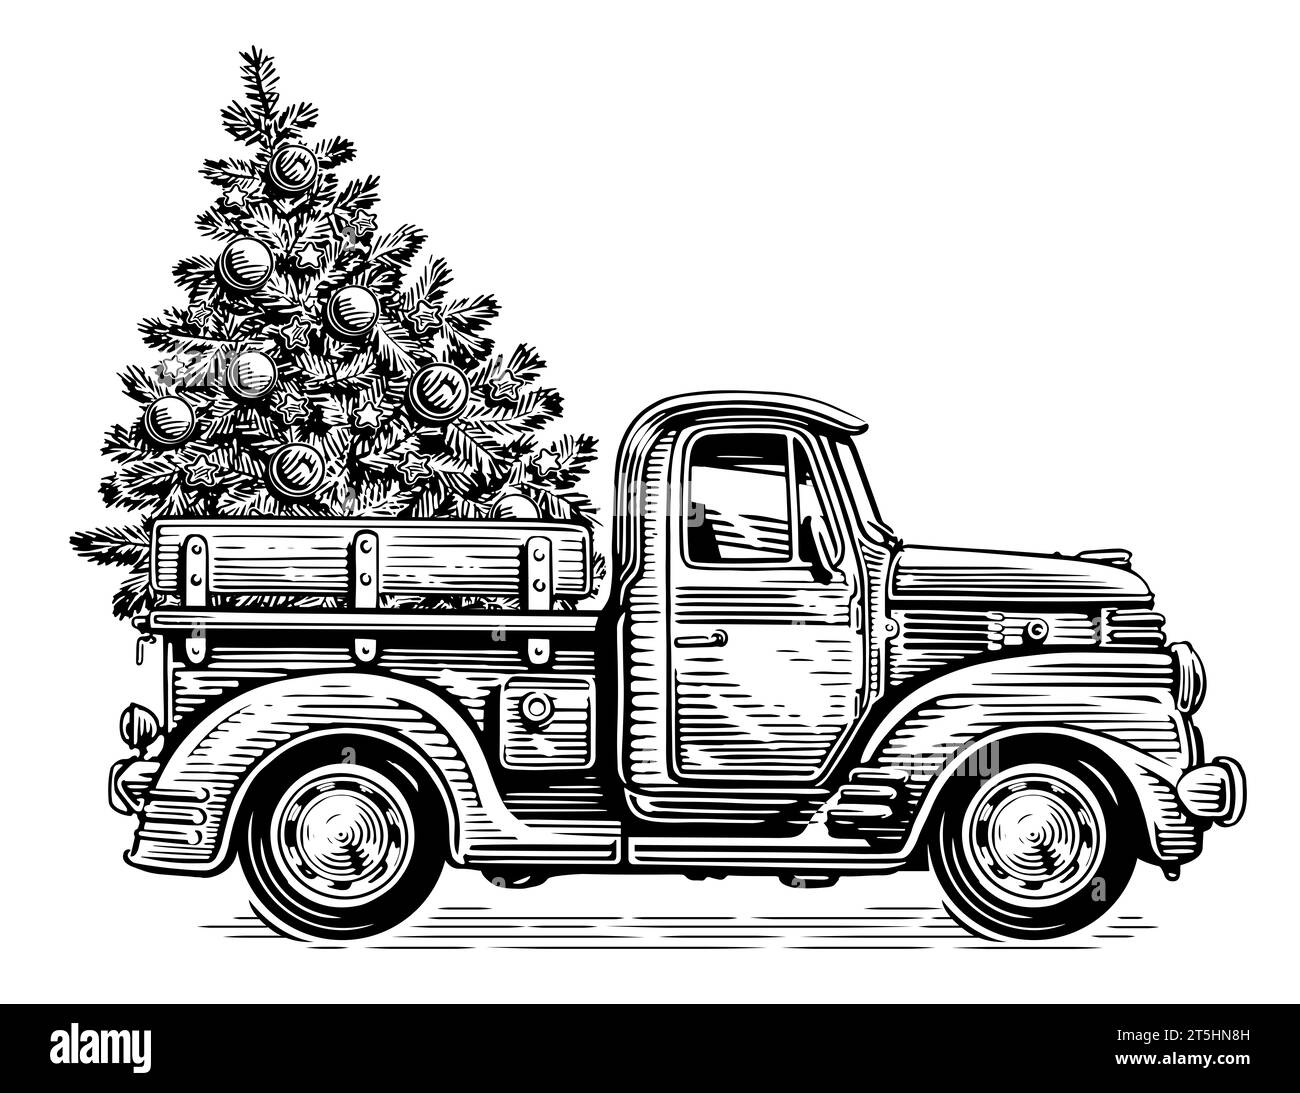 Hand drawn Christmas retro truck with pine tree in sketch style. Happy holidays vintage illustration Stock Photo